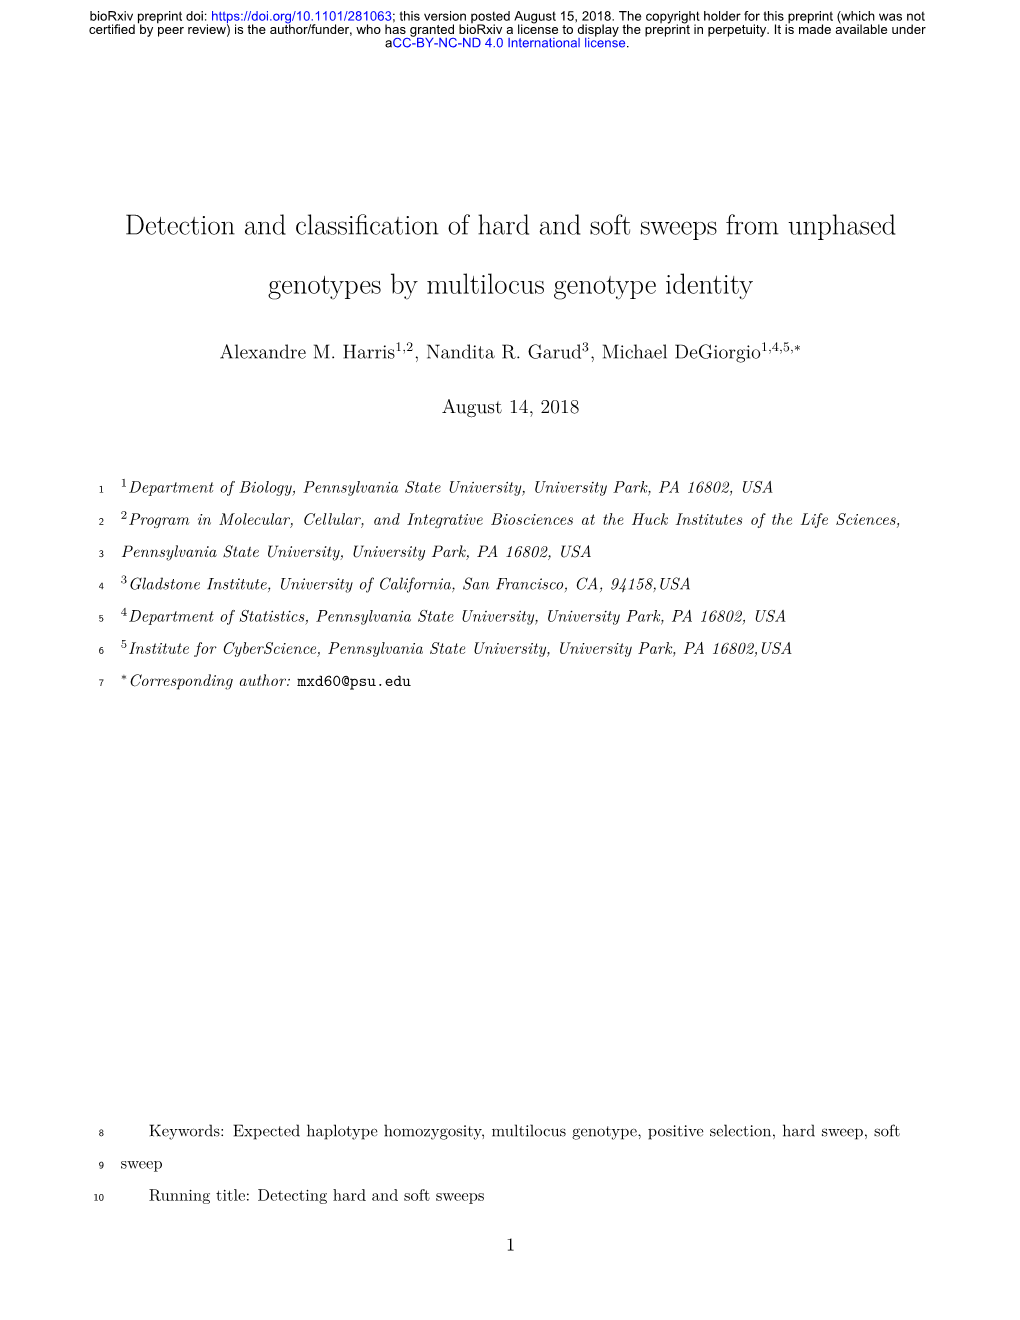 Detection and Classification of Hard and Soft Sweeps from Unphased